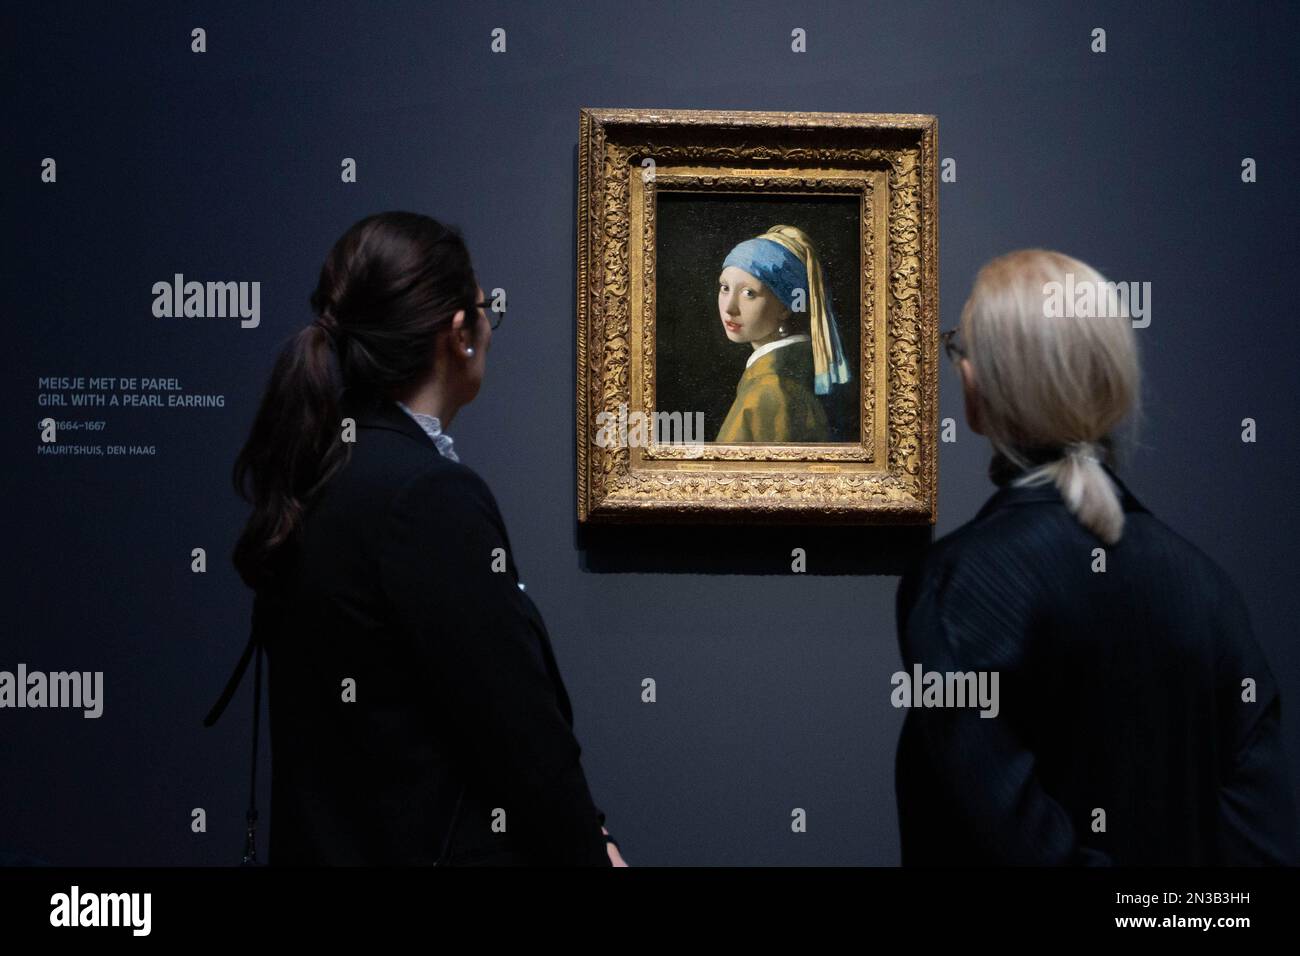 Amsterdam, Netherlands. 7th Feb, 2023. Visitors view the artwork Girl with a Pearl Earring by Dutch painter Johannes Vermeer during a press preview of an exhibition at Rijksmuseum in Amsterdam, the Netherlands, on Feb. 7, 2023. With loans from all over the world, the exhibition is expected to be the largest Vermeer exhibition ever and is scheduled to open to the public from Feb. 10 to June 4. Credit: Sylvia Lederer/Xinhua/Alamy Live News Stock Photo